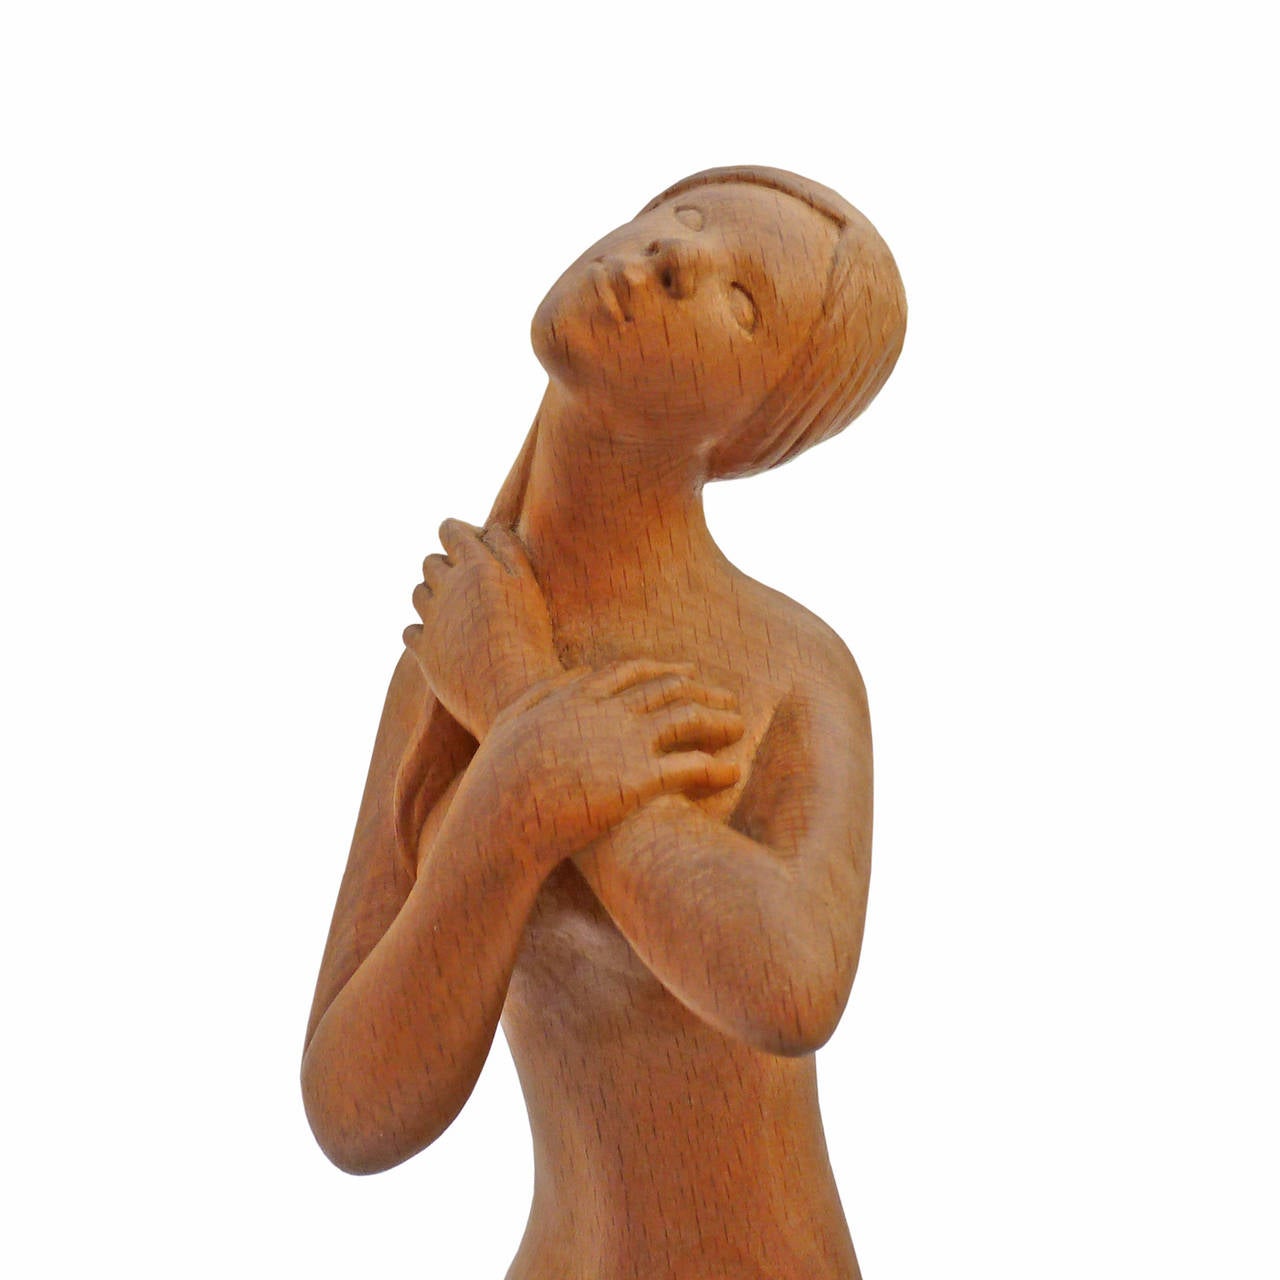 Wood Luis Sanguino Hand-Carved Mahogany Sculpture of a Nude Woman